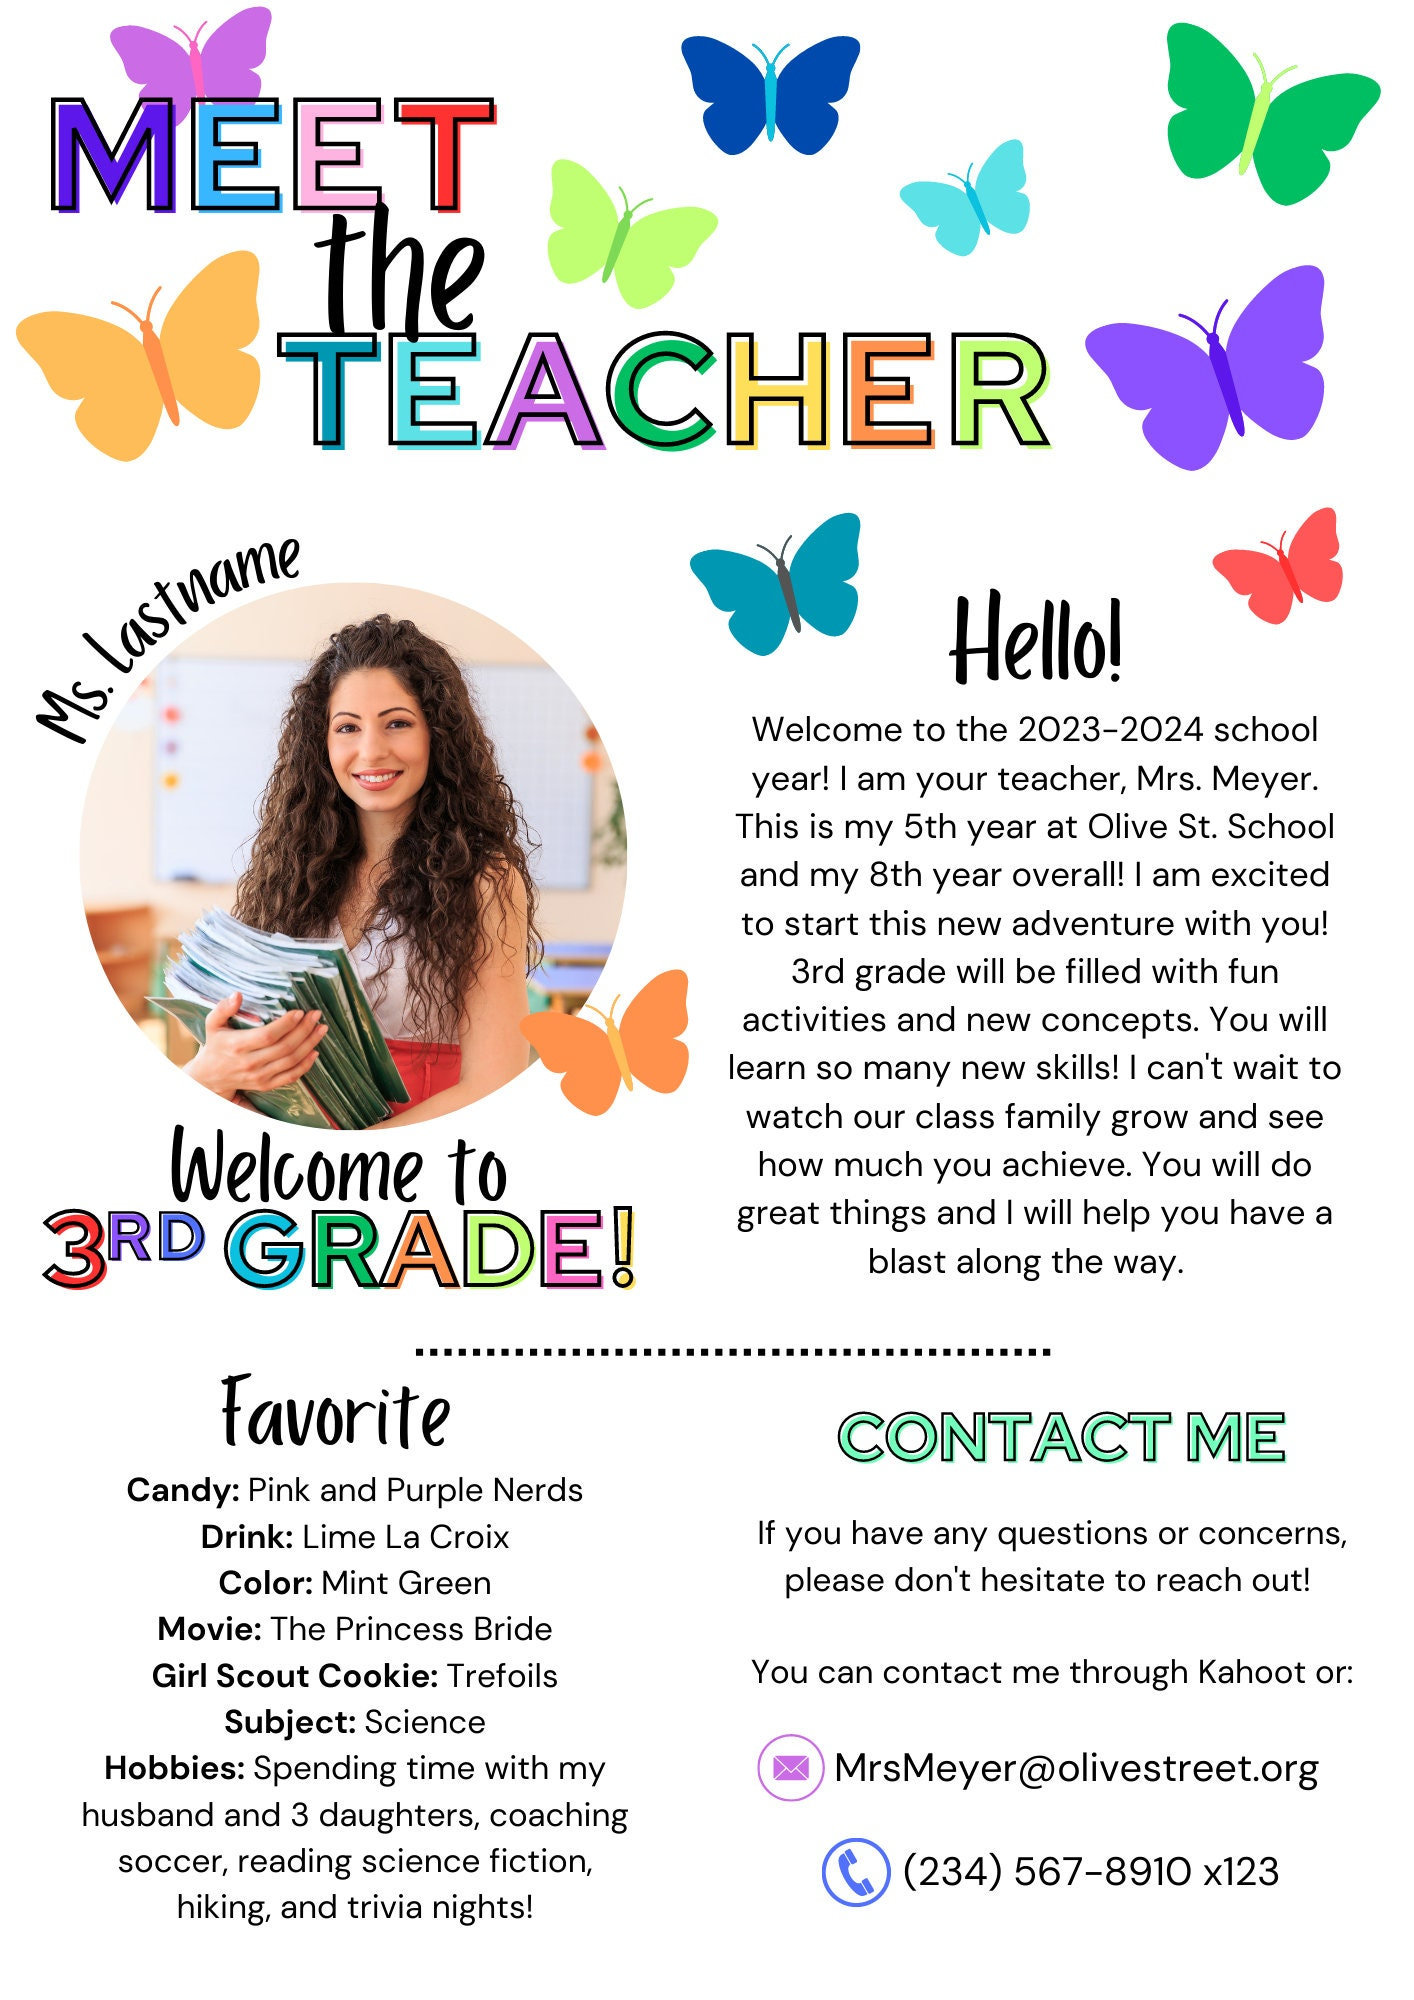 Cool and Unexpected Teacher Gifts Under $20 - The Butterfly Teacher